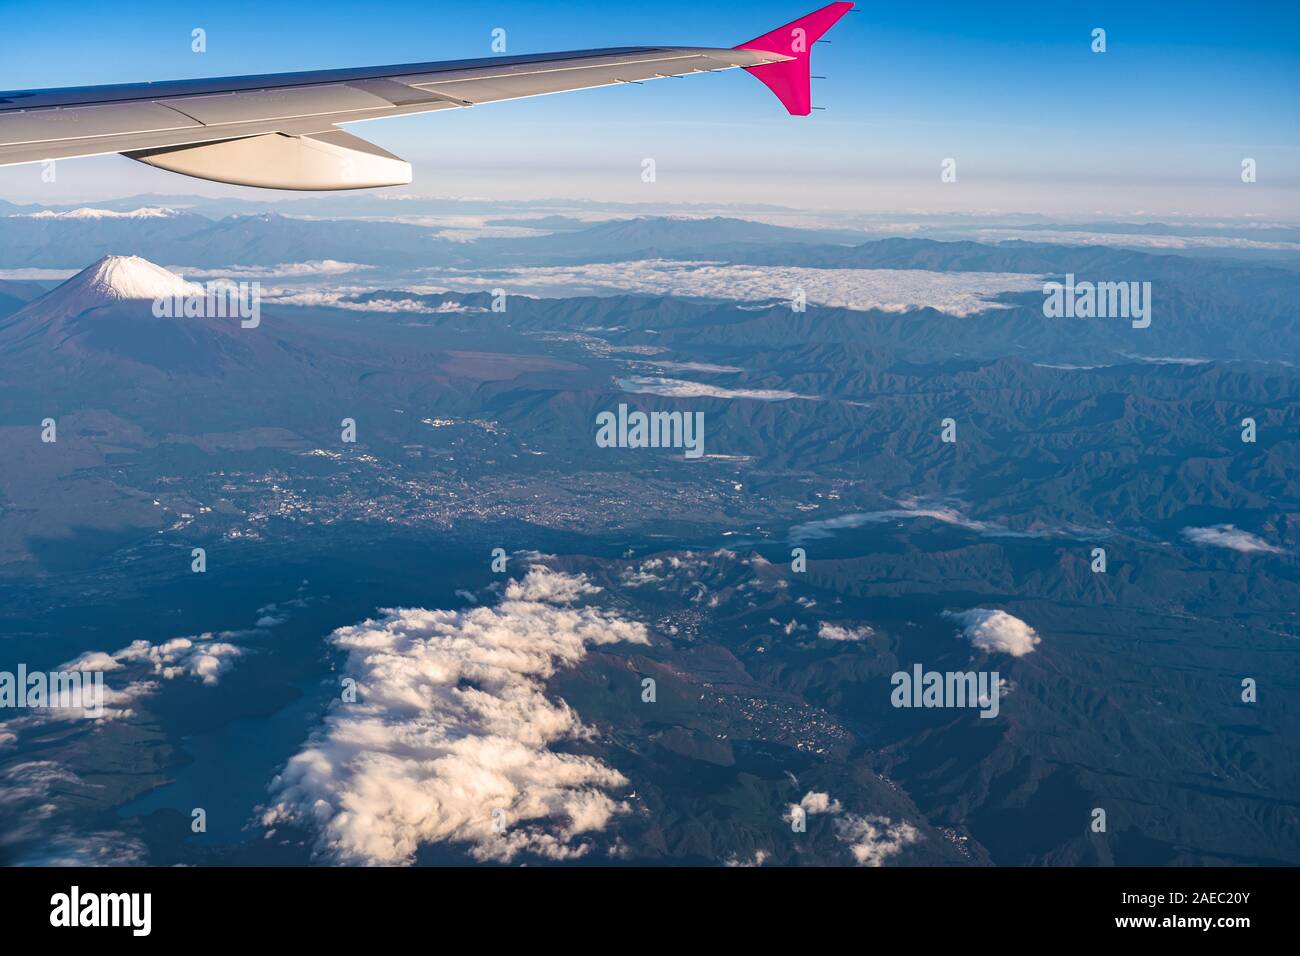 Aerial view of airplane wing with Mount Fuji ( Mt. Fuji ) in background and blue sky. Scenery landscapes of the Fuji-Hakone-Izu National Park. Gotemba Stock Photo